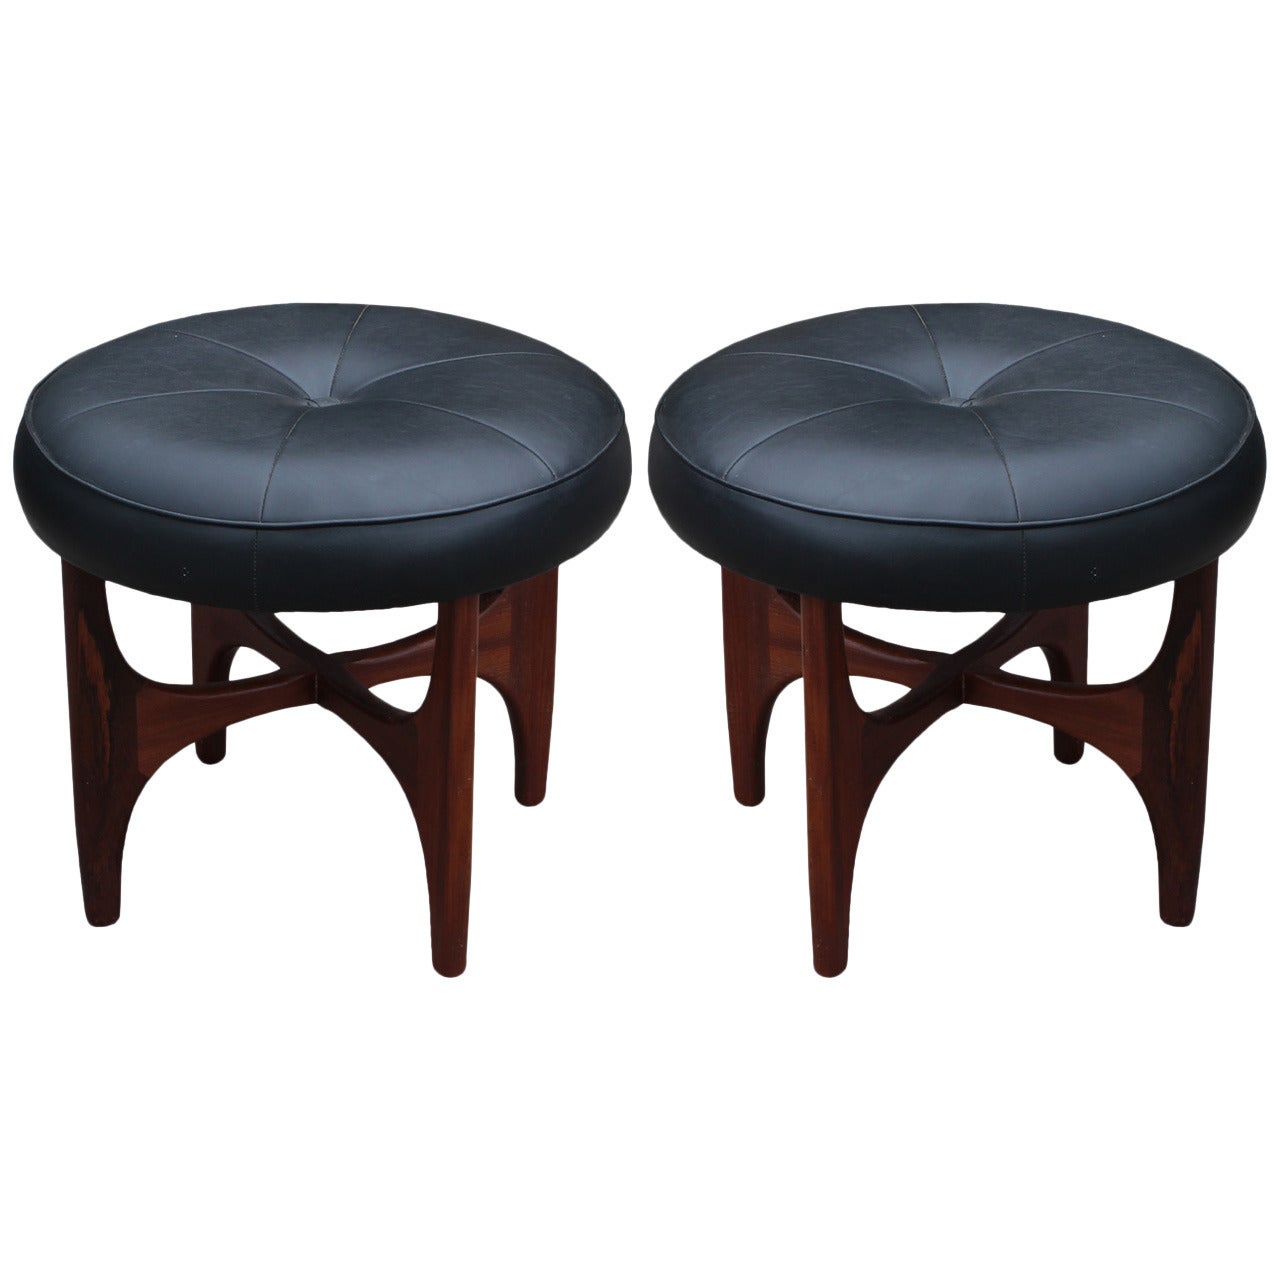 Sculptural Pair of Stools or Ottomans